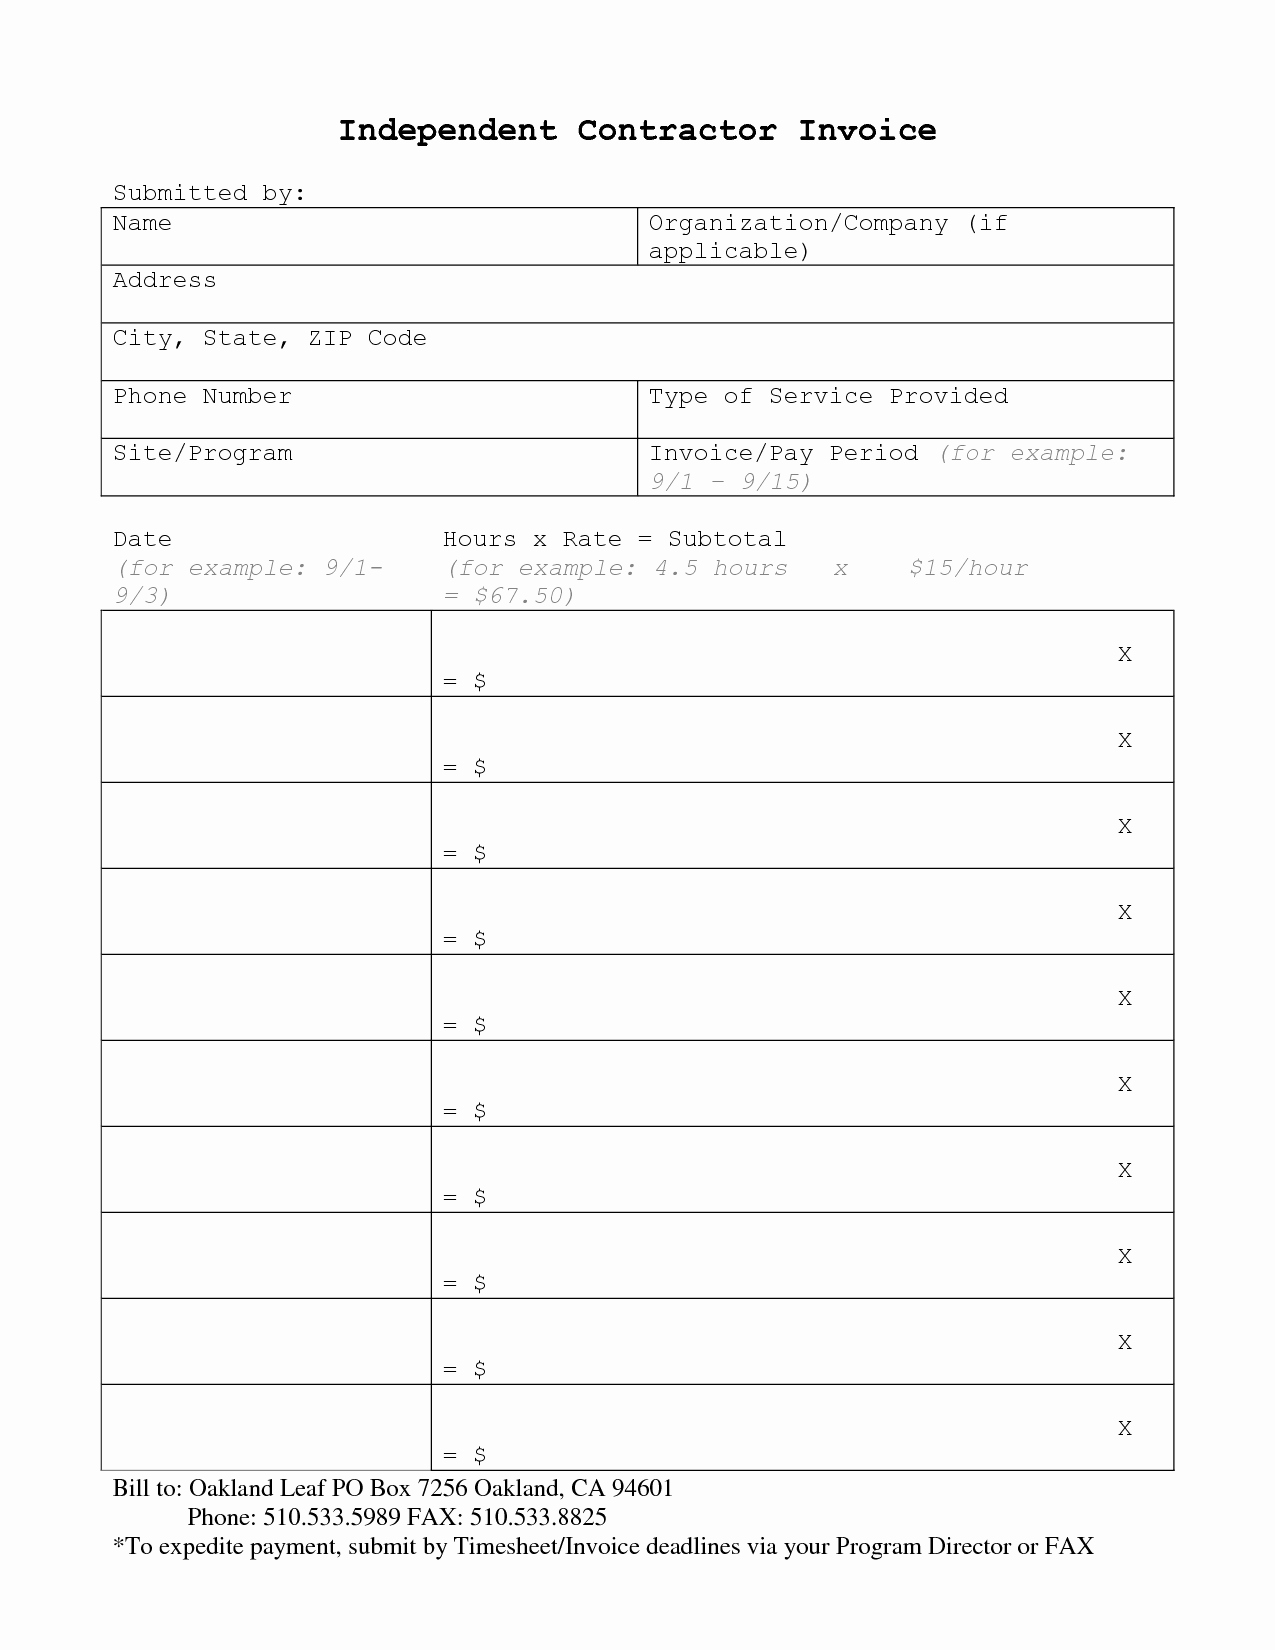 Contractor Invoice Template Free Inspirational Independent Contractor Invoice Template